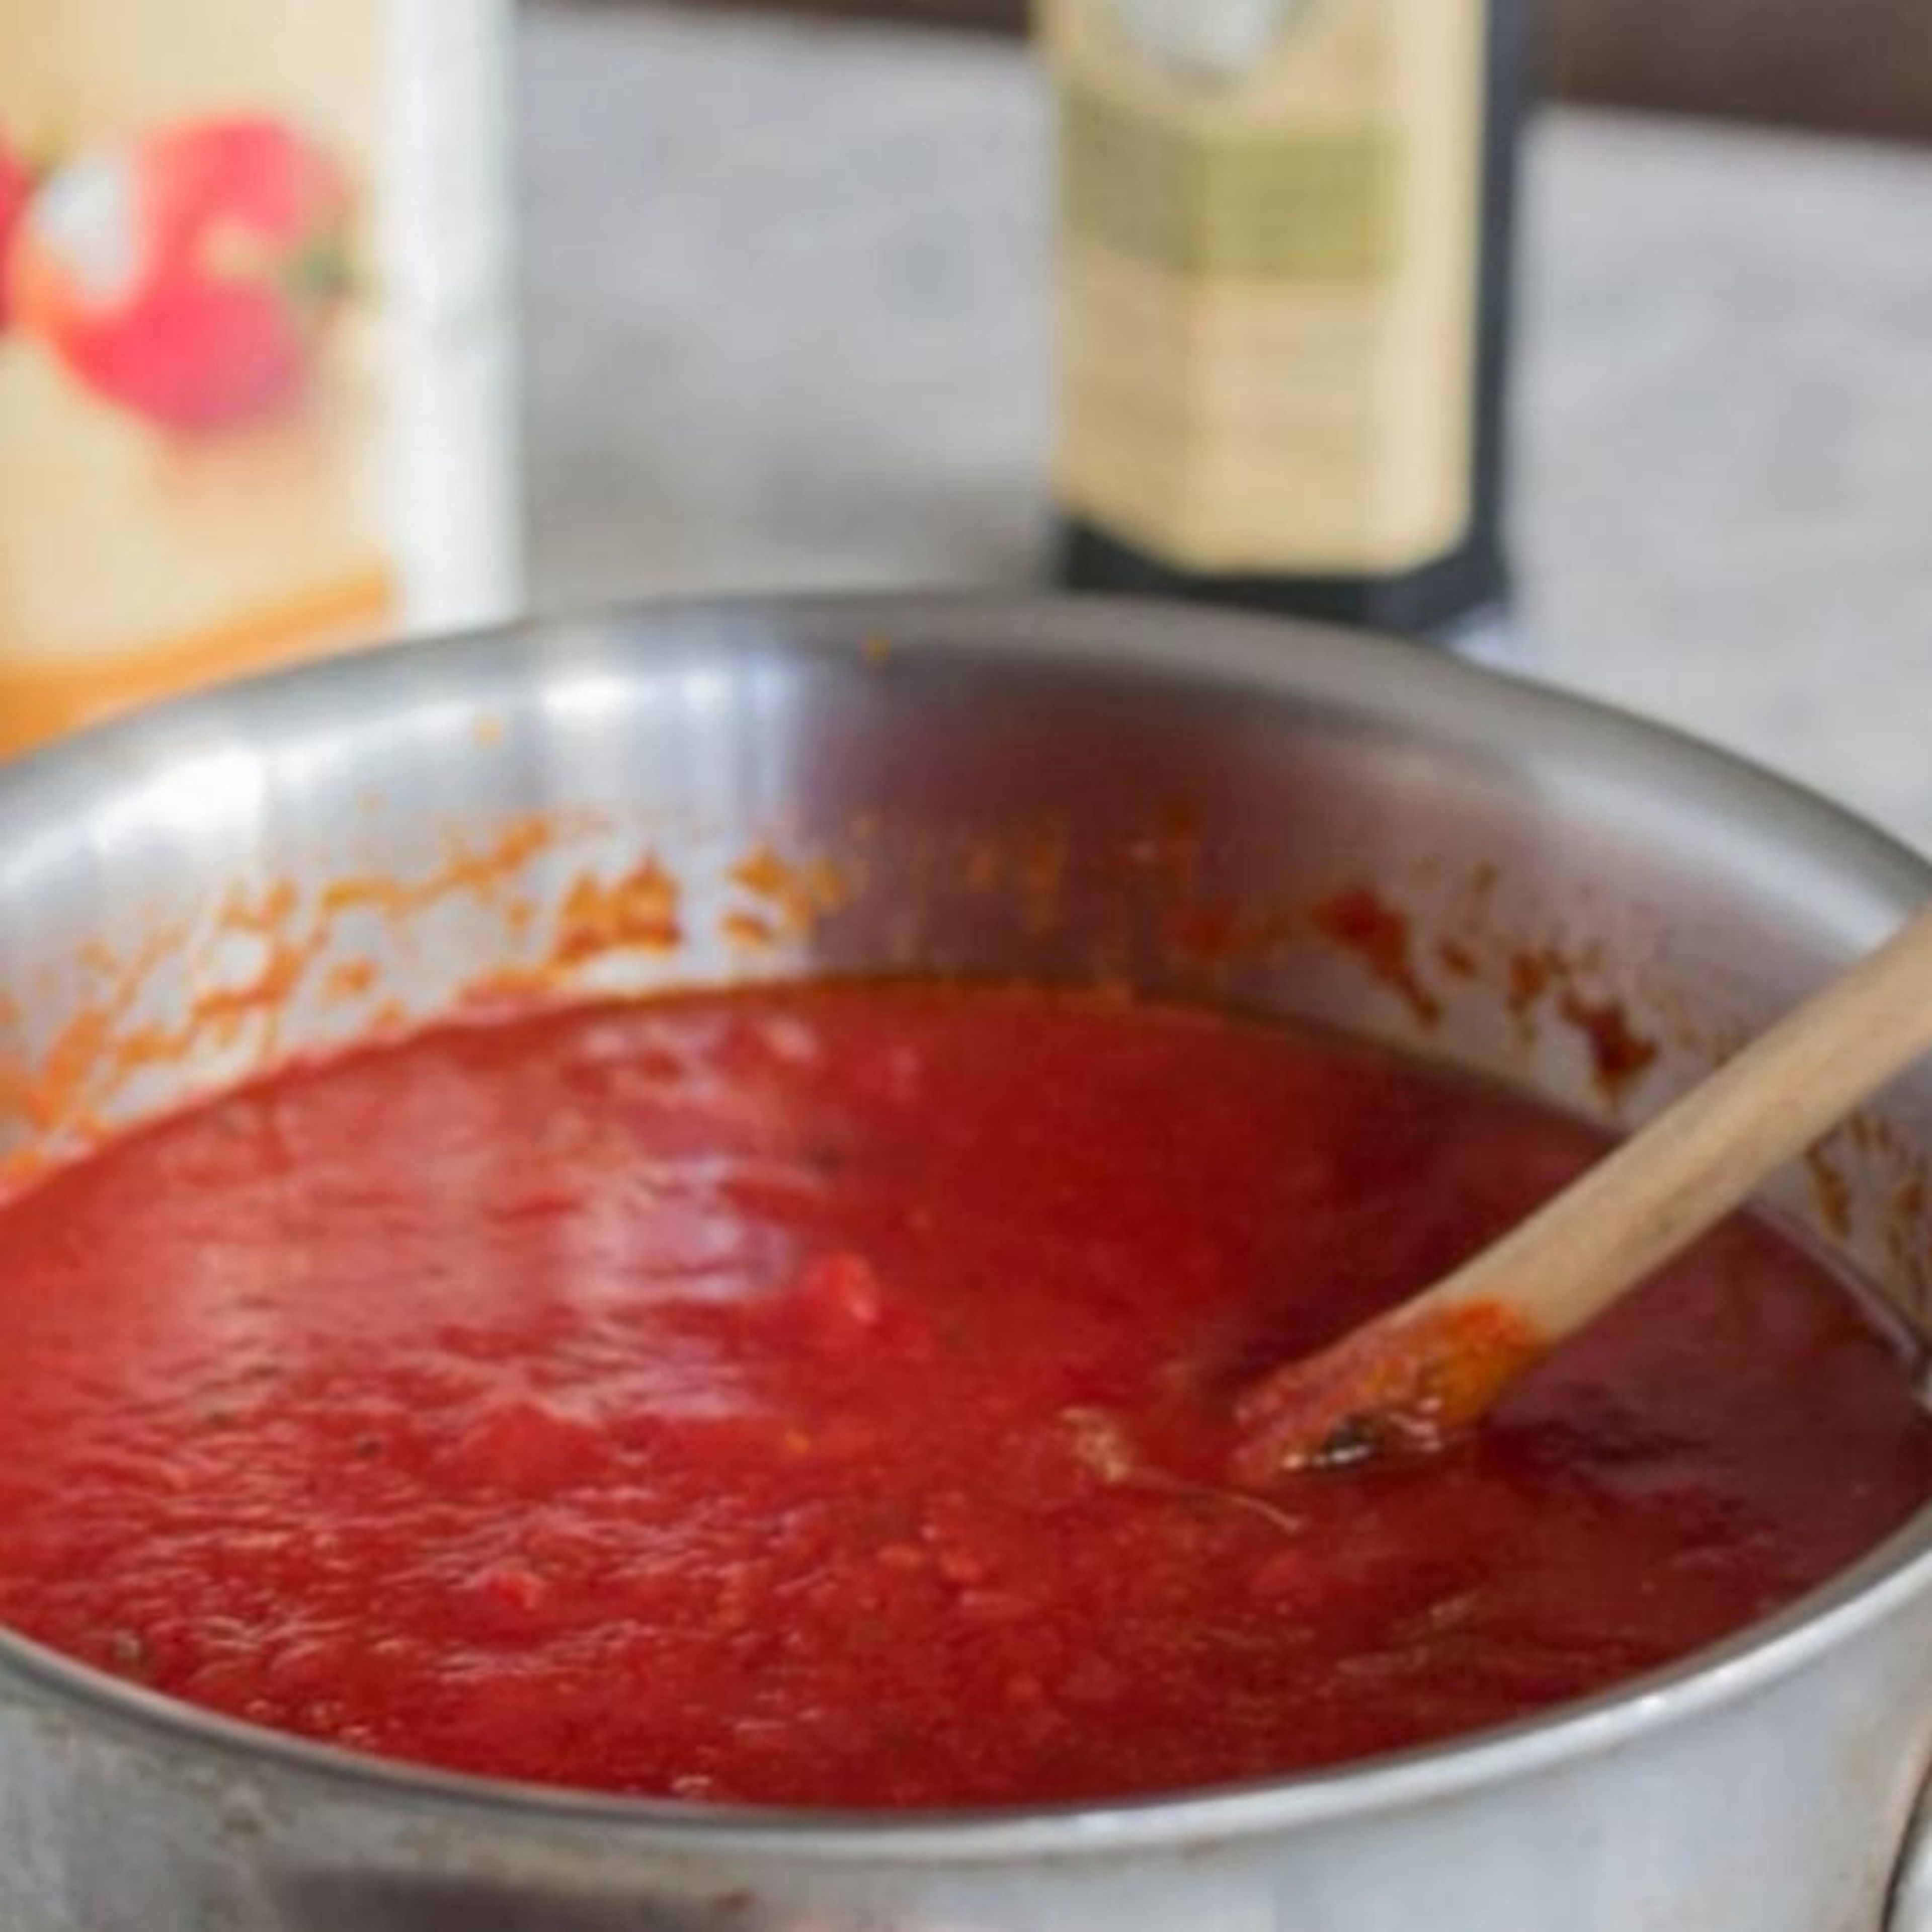 In a separate pan, add olive oil, and one minced garlic clove and tomato paste, cook for a few minutes then add your tomato Passata. season with salt and pepper.